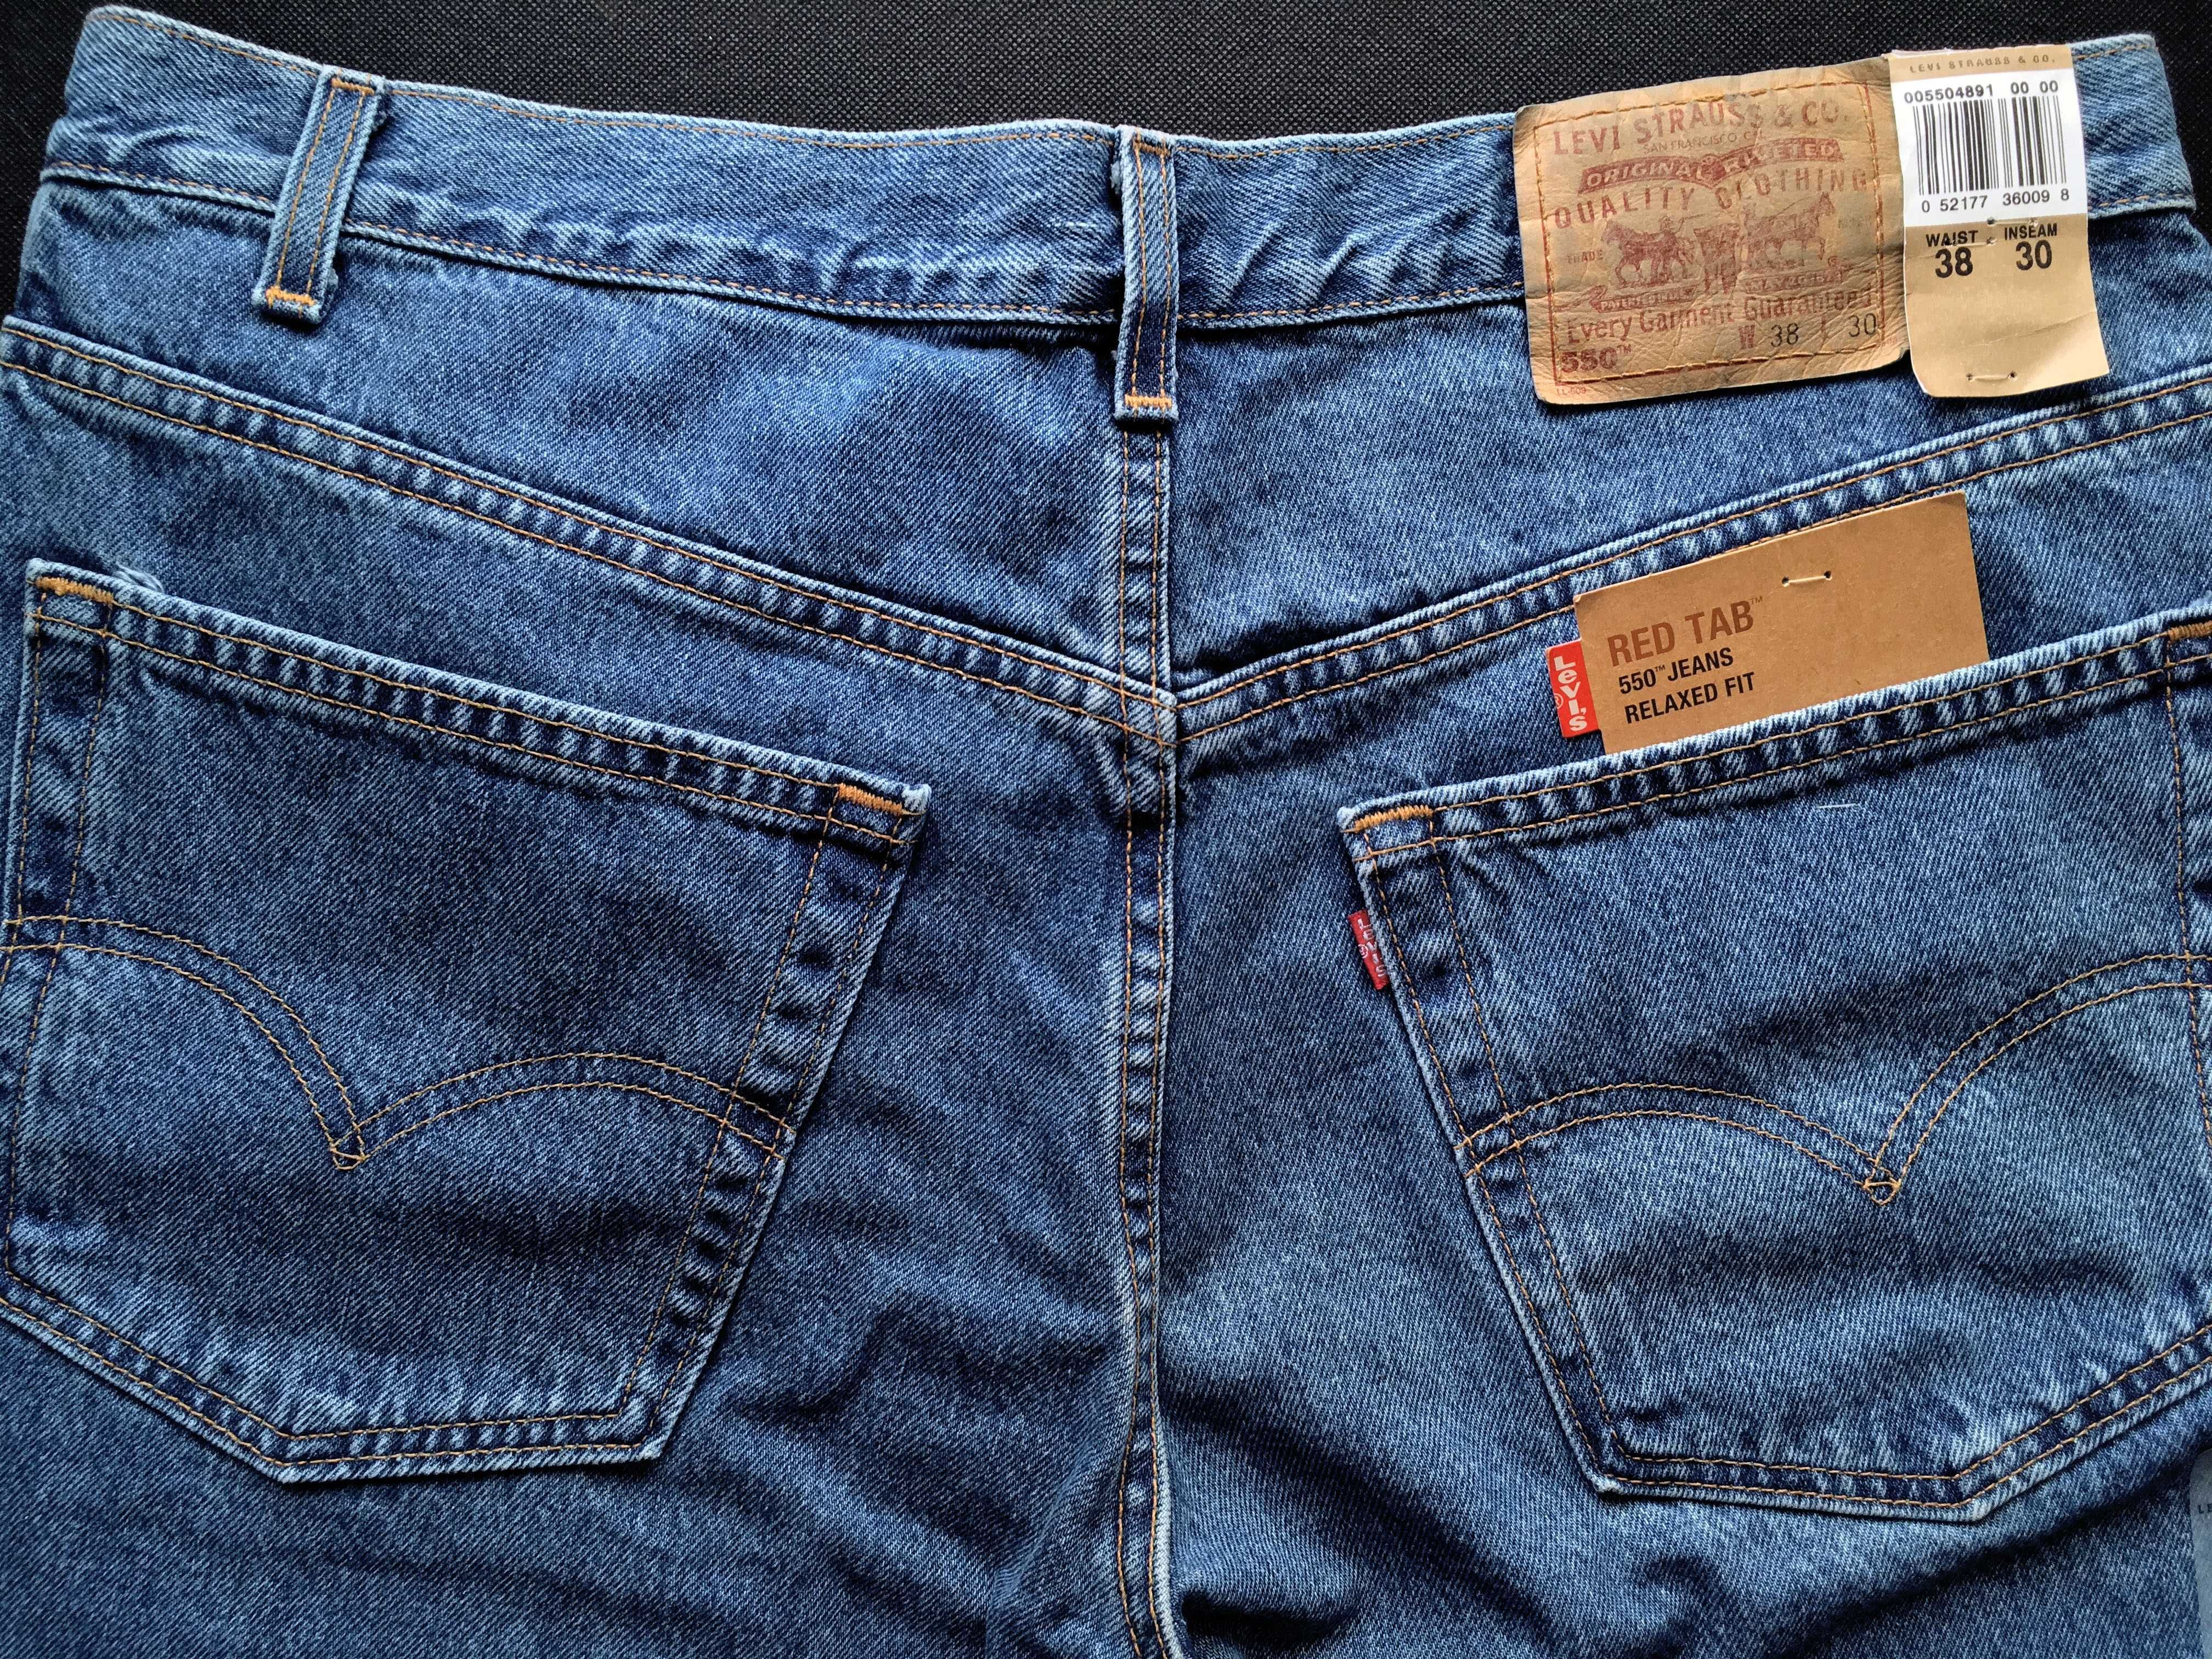 VINTAGE 2001 Made in U.S.A. LEVI'S® 550™ Relaxed Fit Jeans — W38 L30